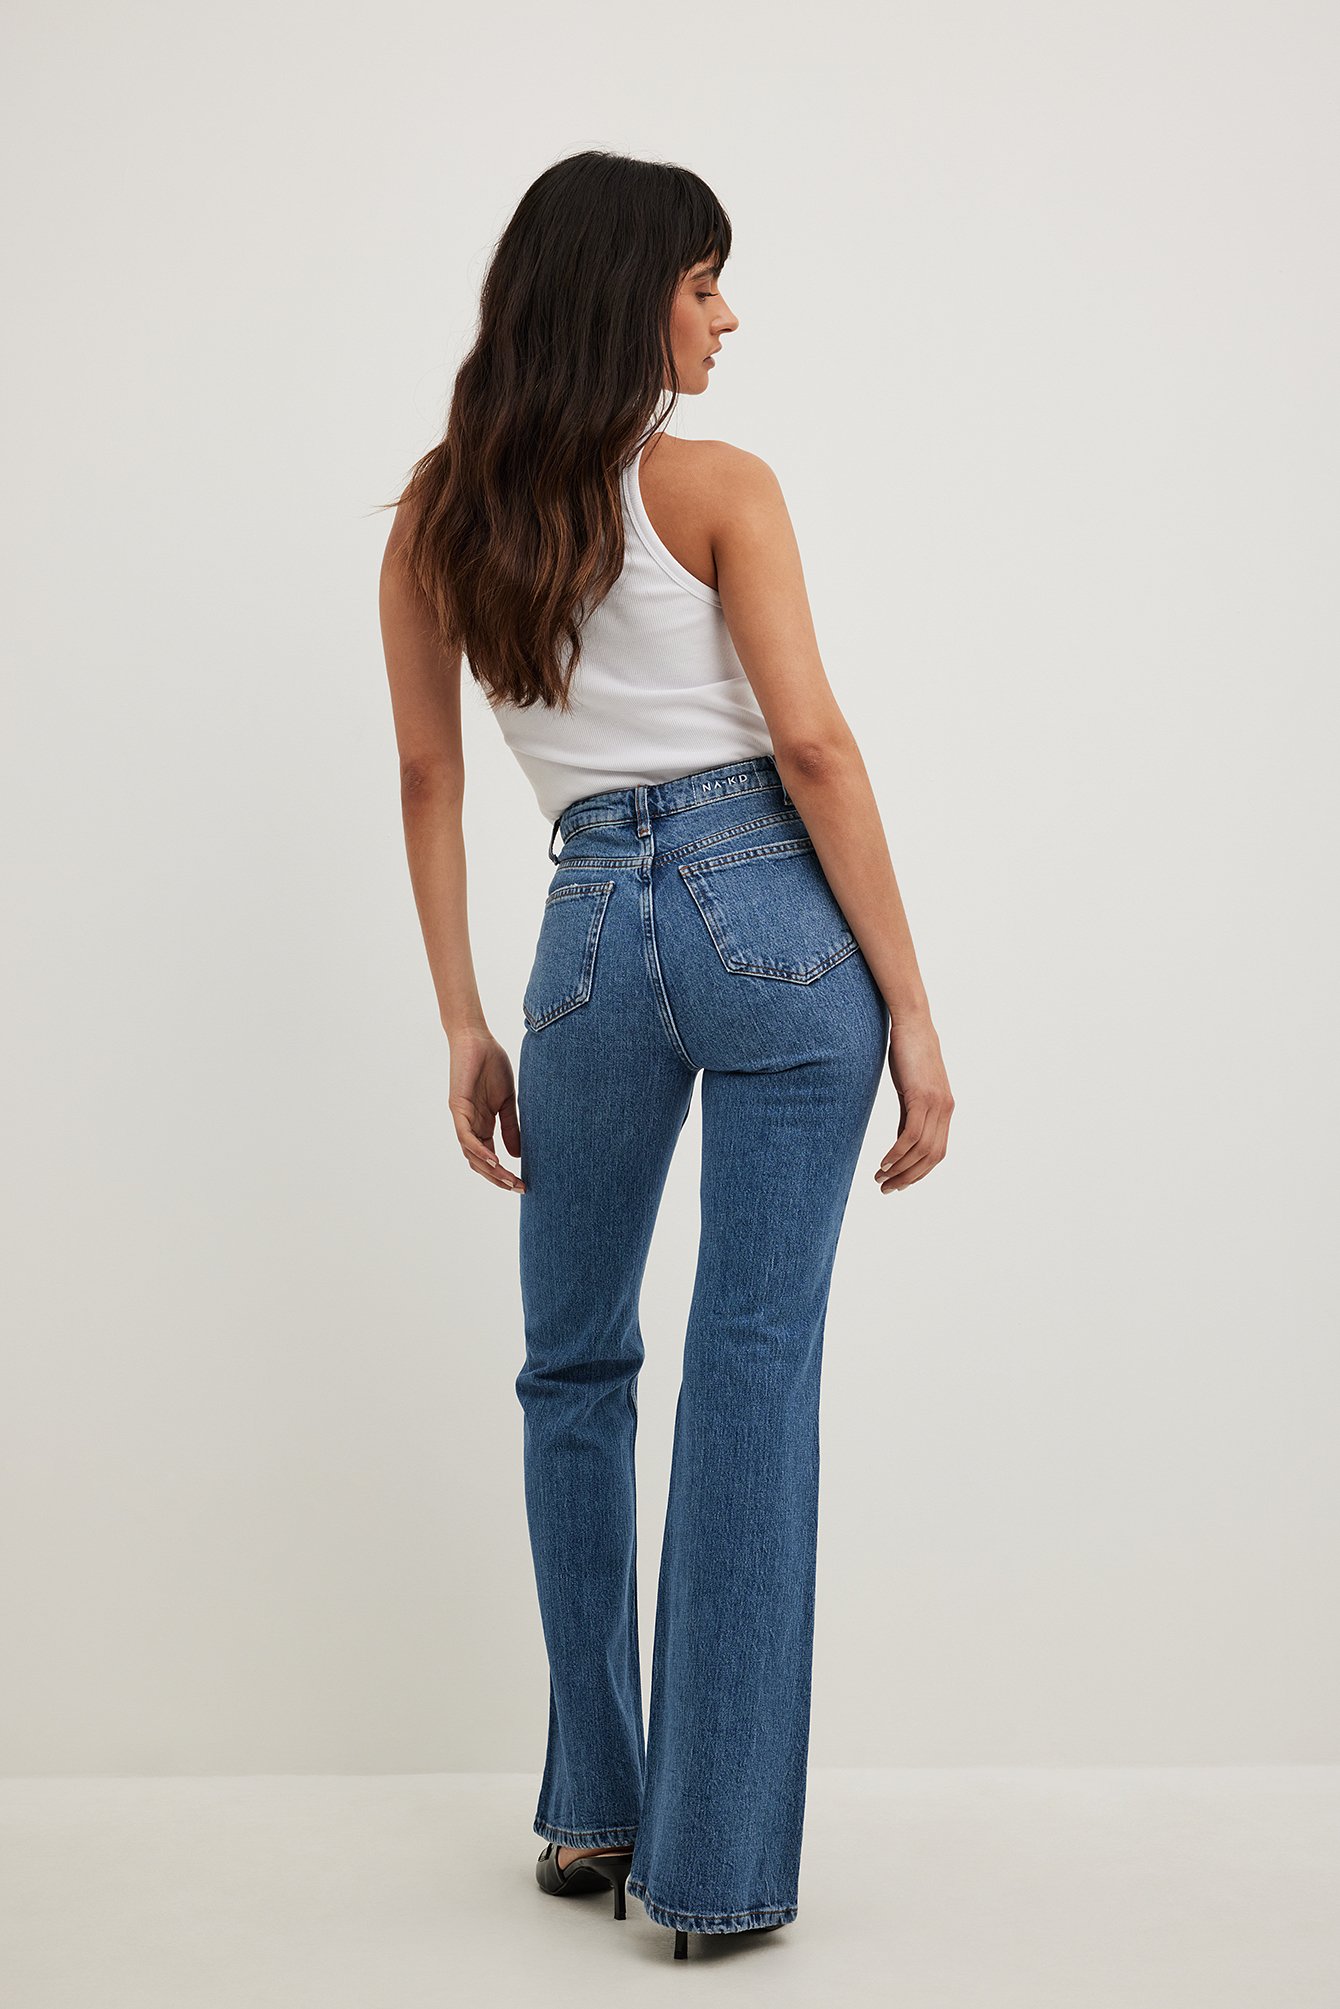 It's Happening Again: The Return of Low-Rise Jeans - WSJ